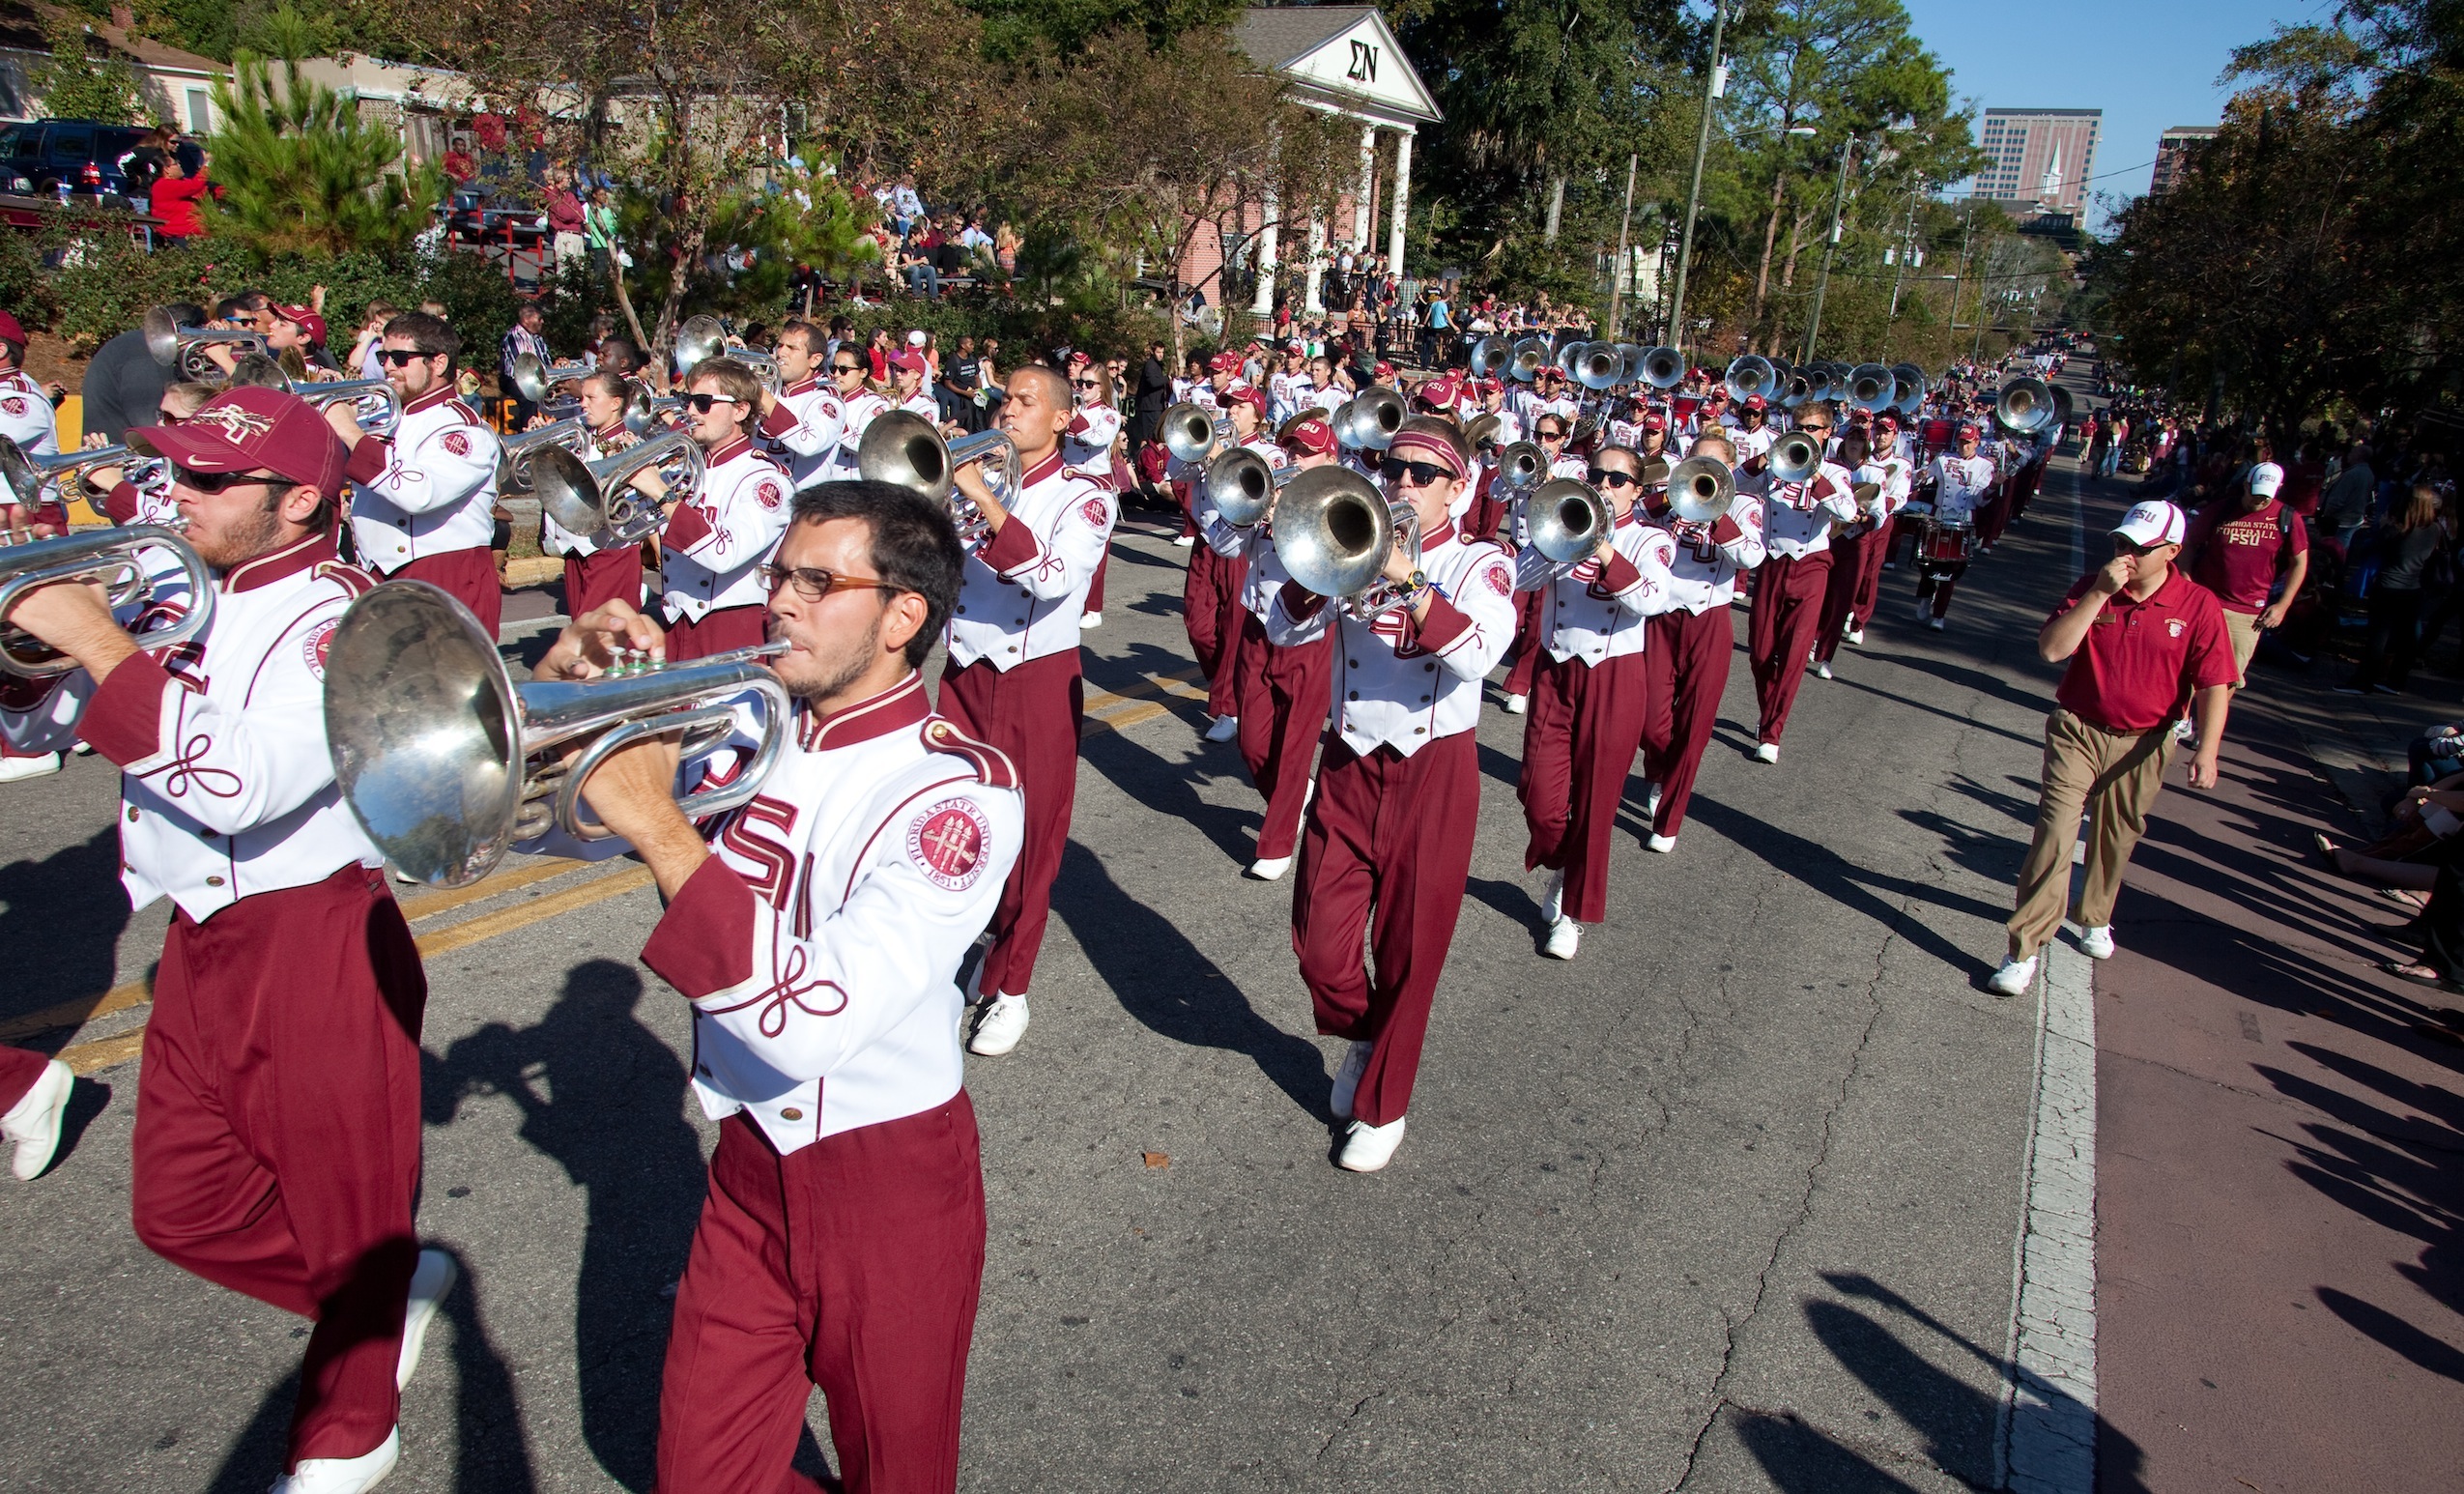 The Marching Chiefs will strut their stuff during the Homecoming Parade.